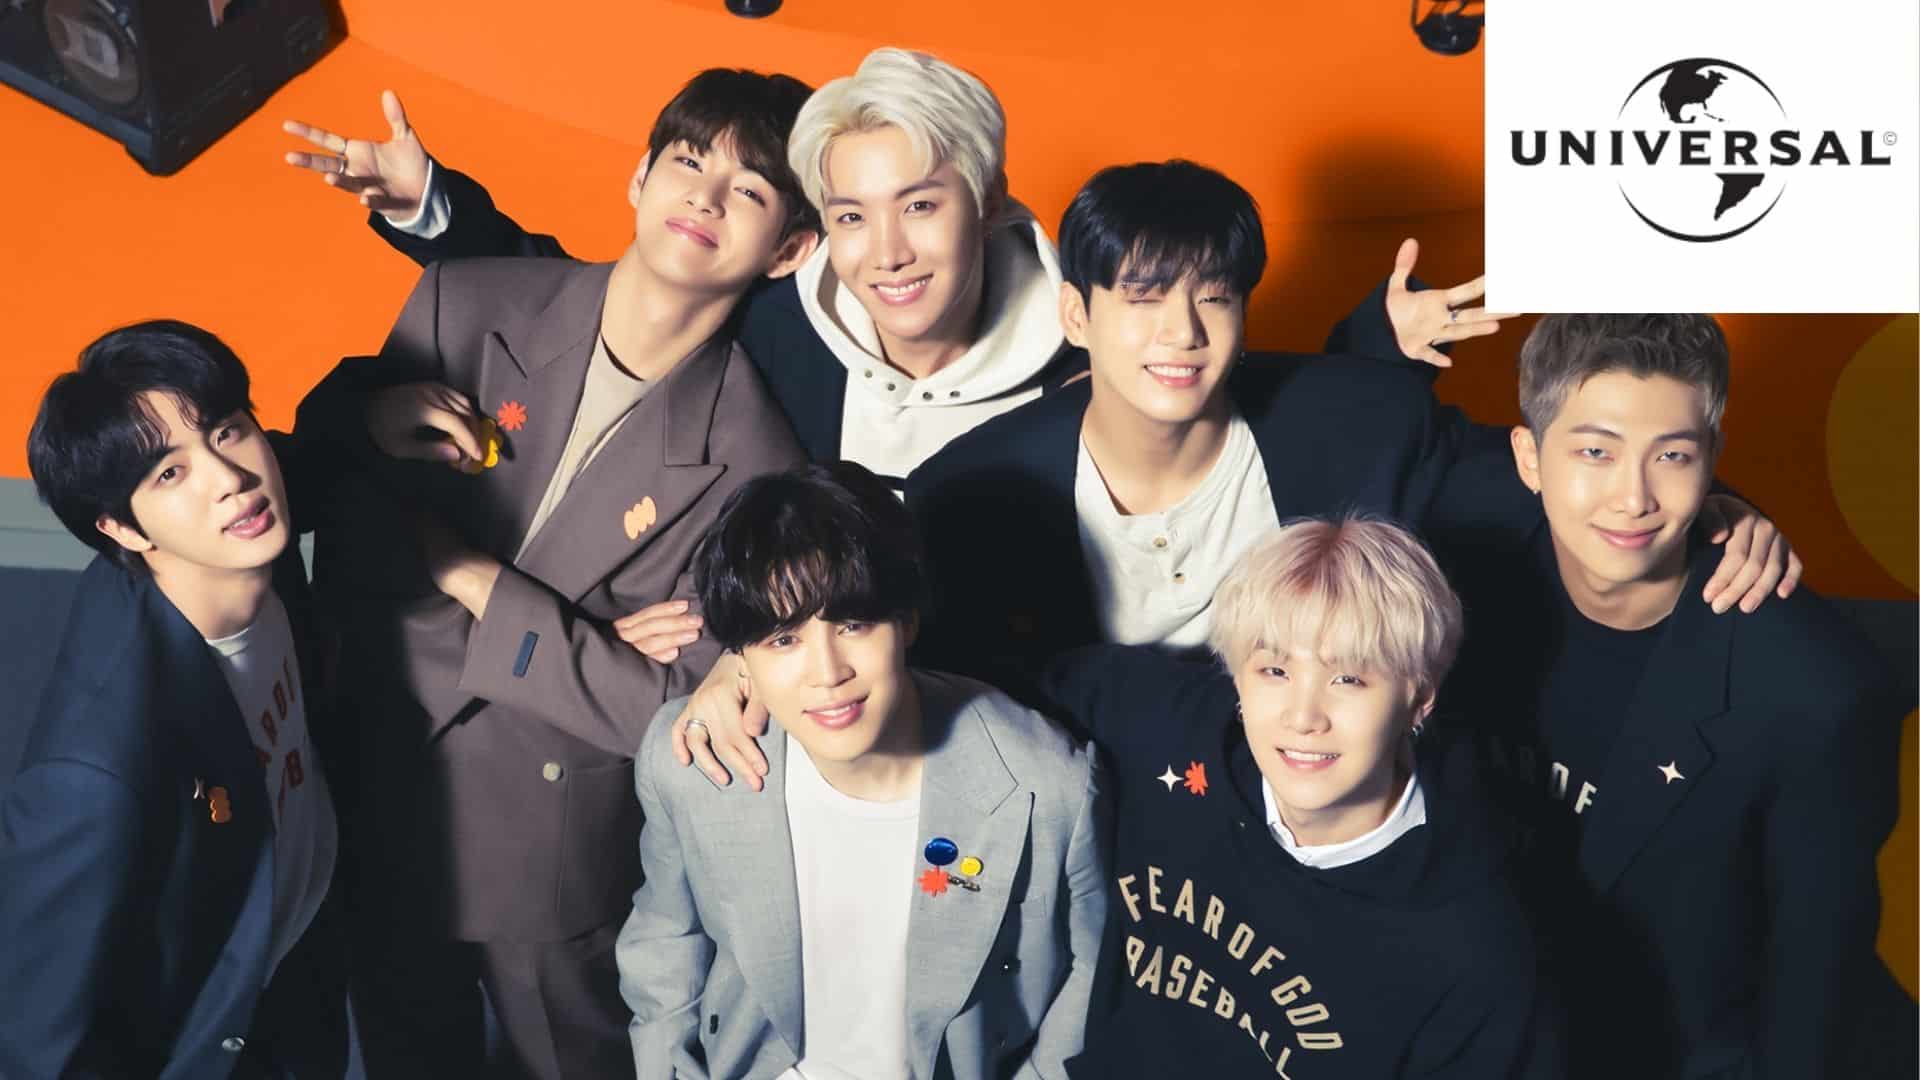 BTS le dice “Adiós” a Columbia Records y “Hola” a Universal Music